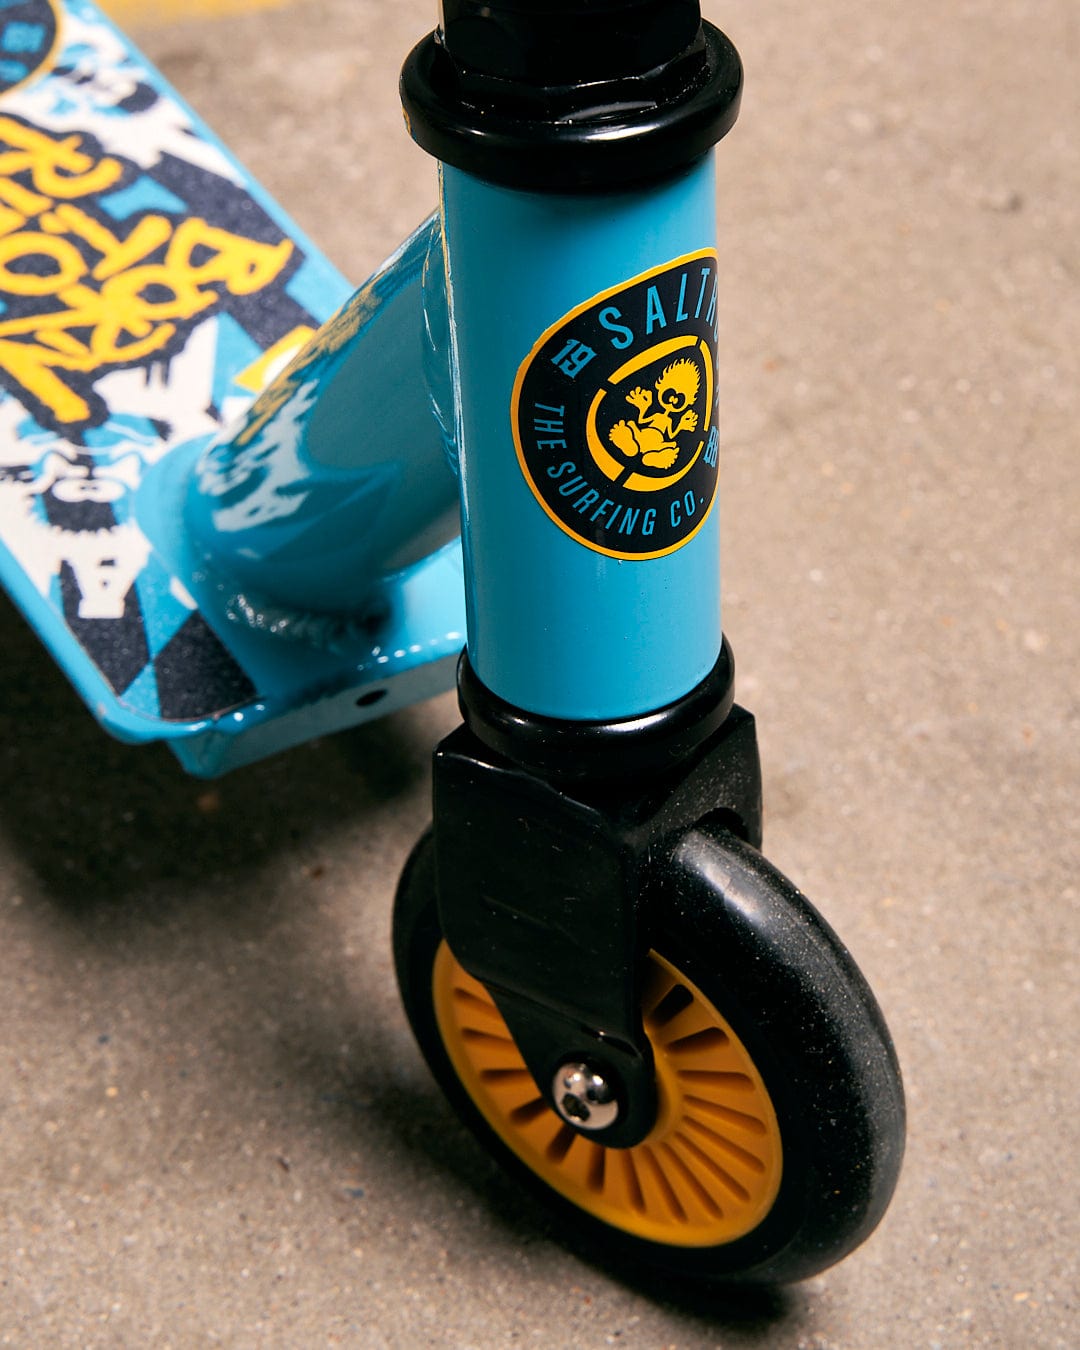 A Saltrock blue Warped - Stunt Scooter with a yellow wheel.